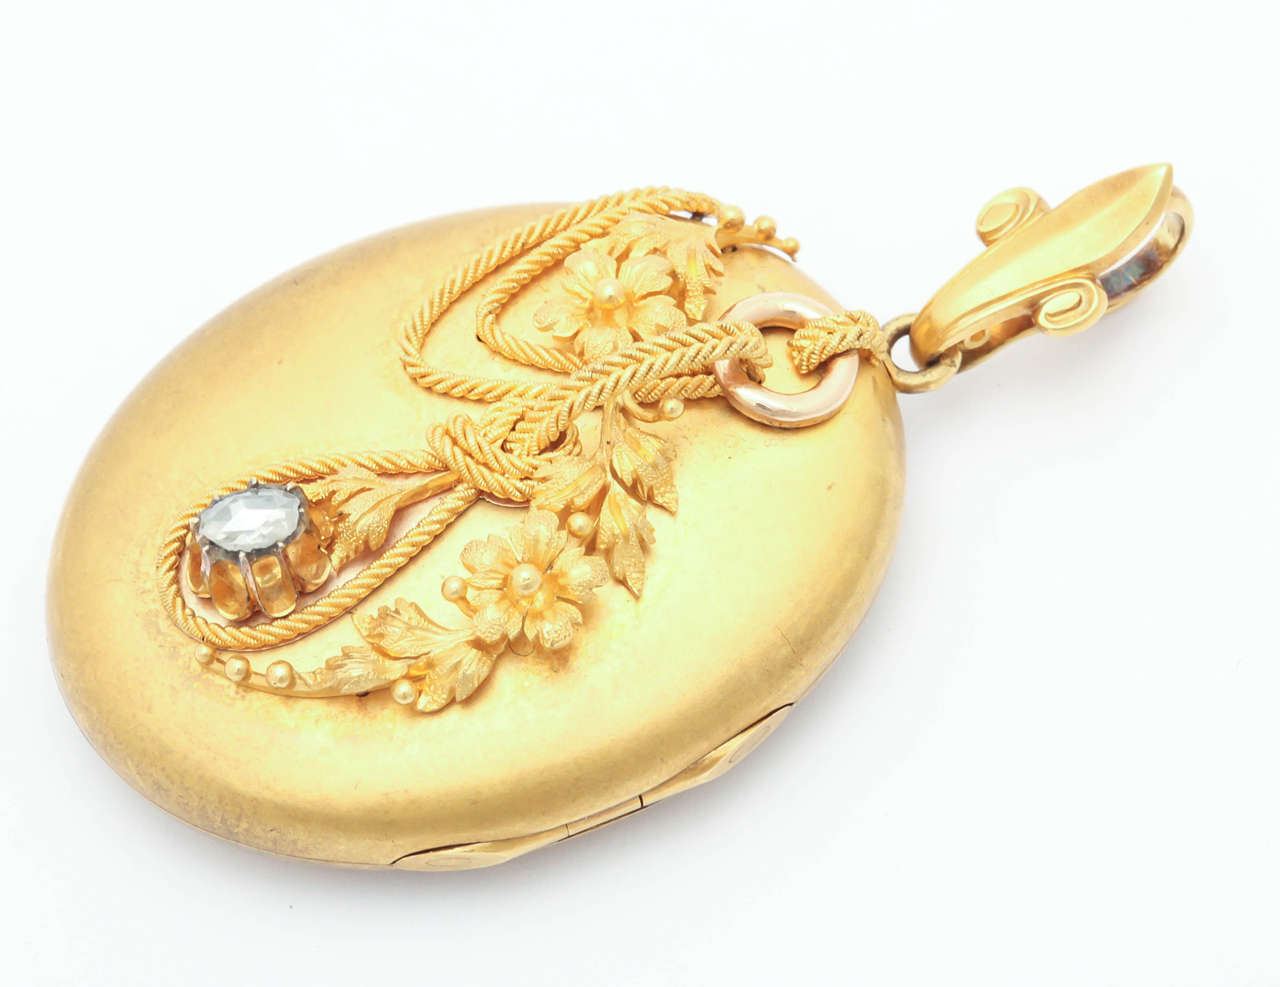 This large oval locket in 14kt gold presents a rare design that projects passion and sentiment. Draped over the face is a cord or rope that passes through a gold ring. Midway down the locket, the cord is knotted. As in a love knot, which is the